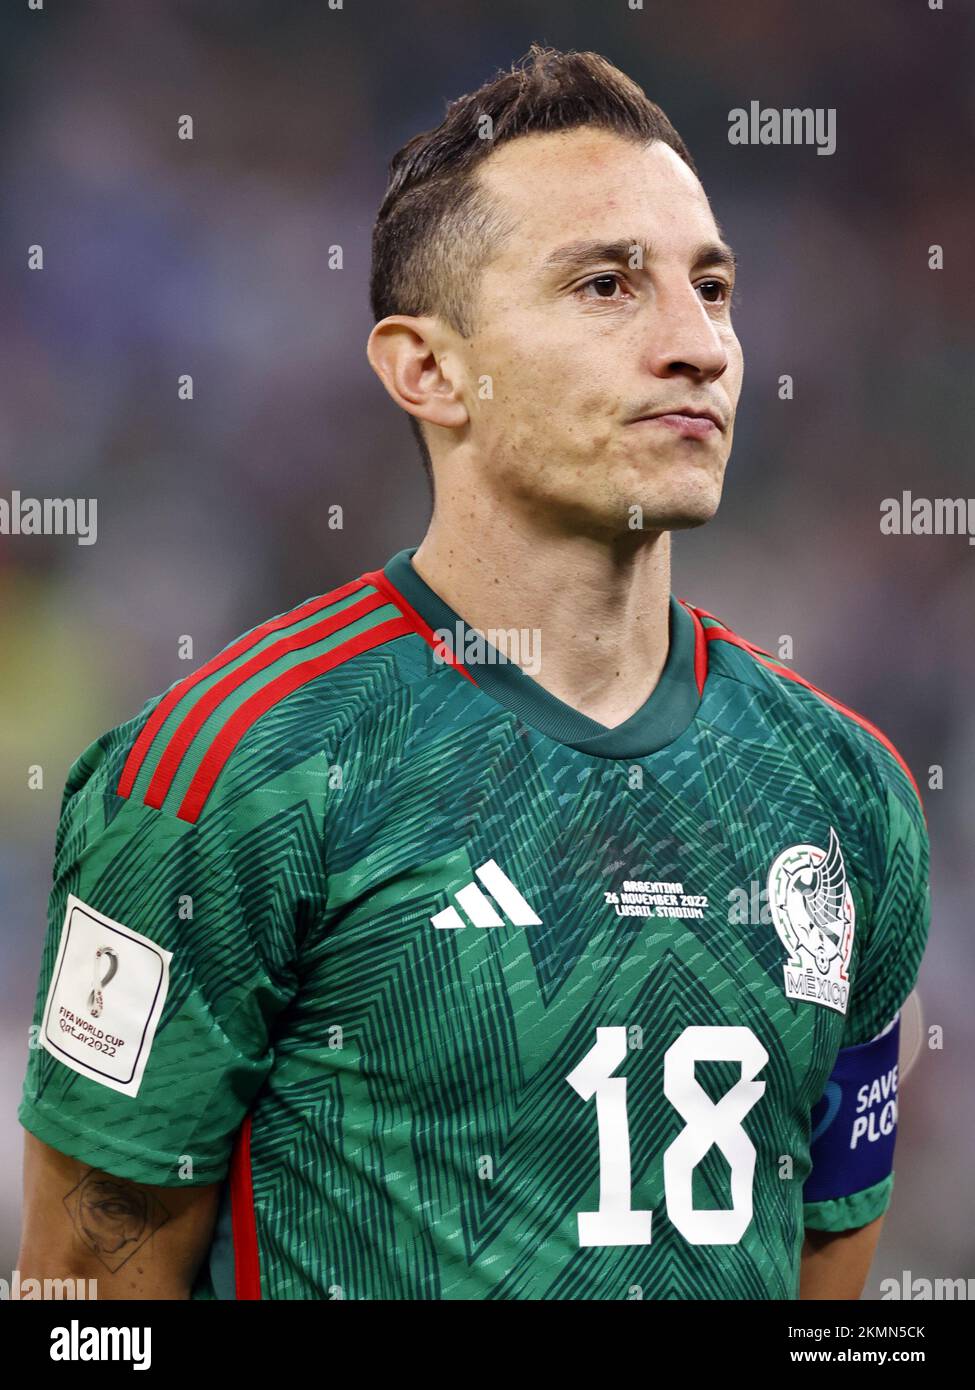 LUSAIL CITY - Andres Guardado of Mexico during the FIFA World Cup Qatar 2022 group C match between Argentina and Mexico at Lusail Stadium on November 26, 2022 in Lusail City, Qatar. AP | Dutch Height | MAURICE OF STONE Stock Photo